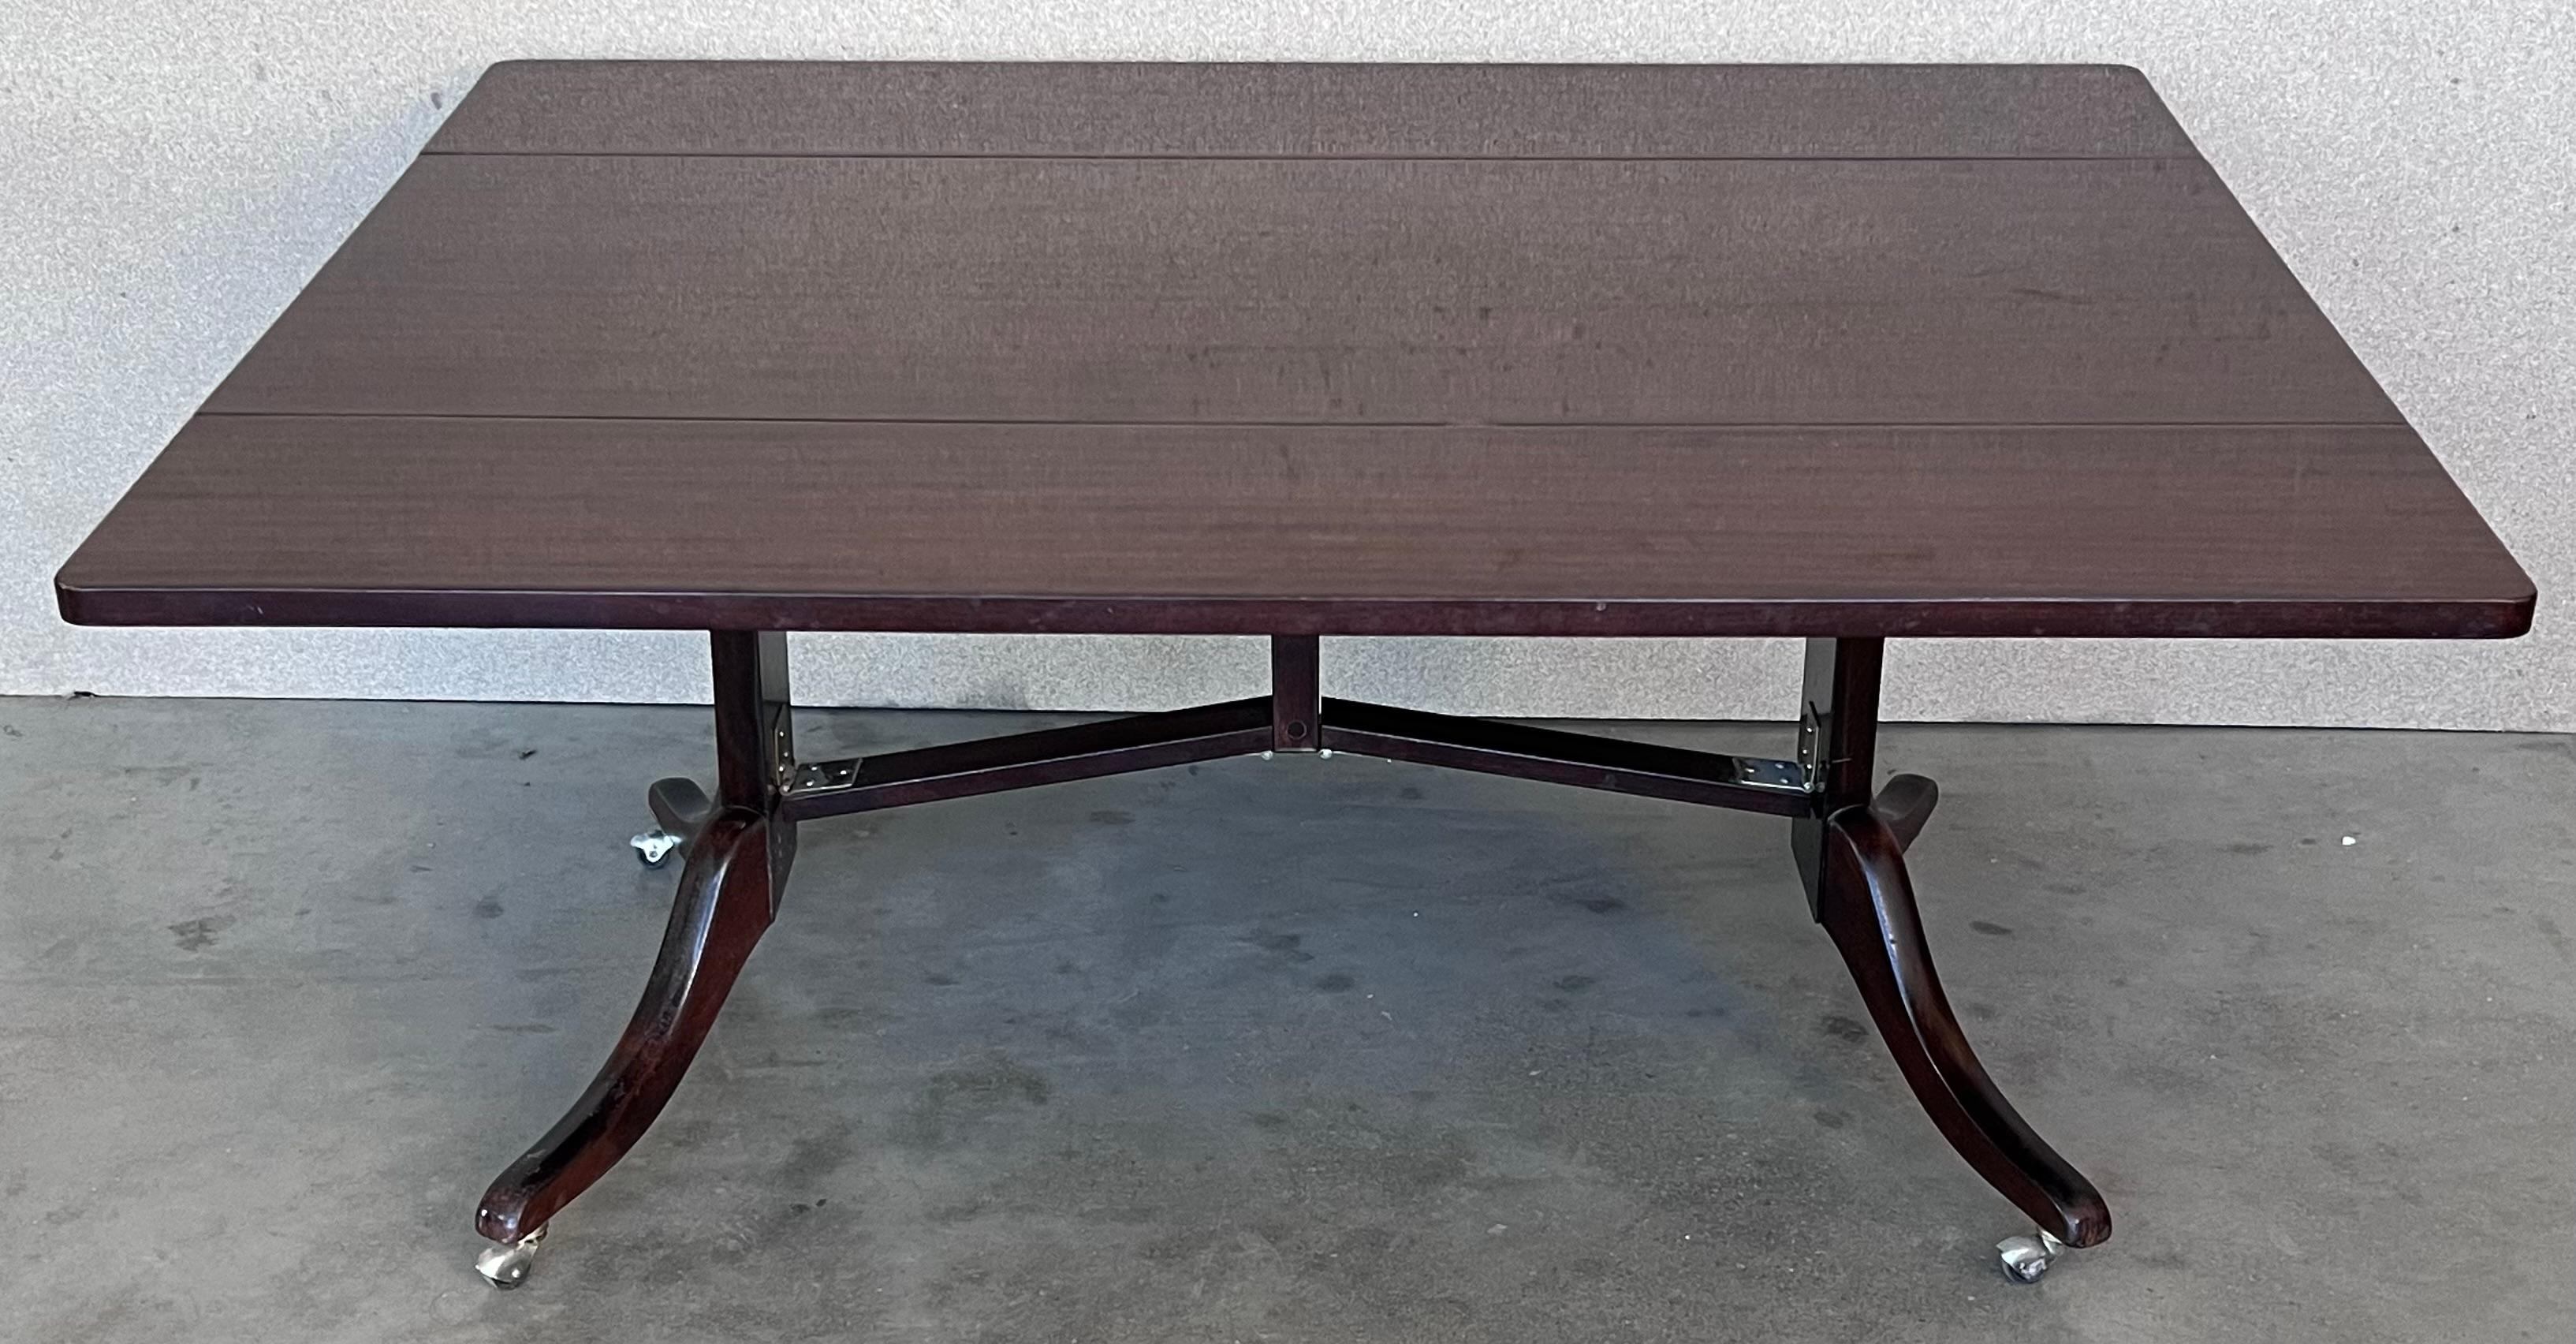 Mid Century Modern Convertible Liftable Coffee Dining Table with folding leafs. 

You can use the table like a coffee table or a dinning room table. The table has a modern patented mechanism of this period that allows to up and down the table, also